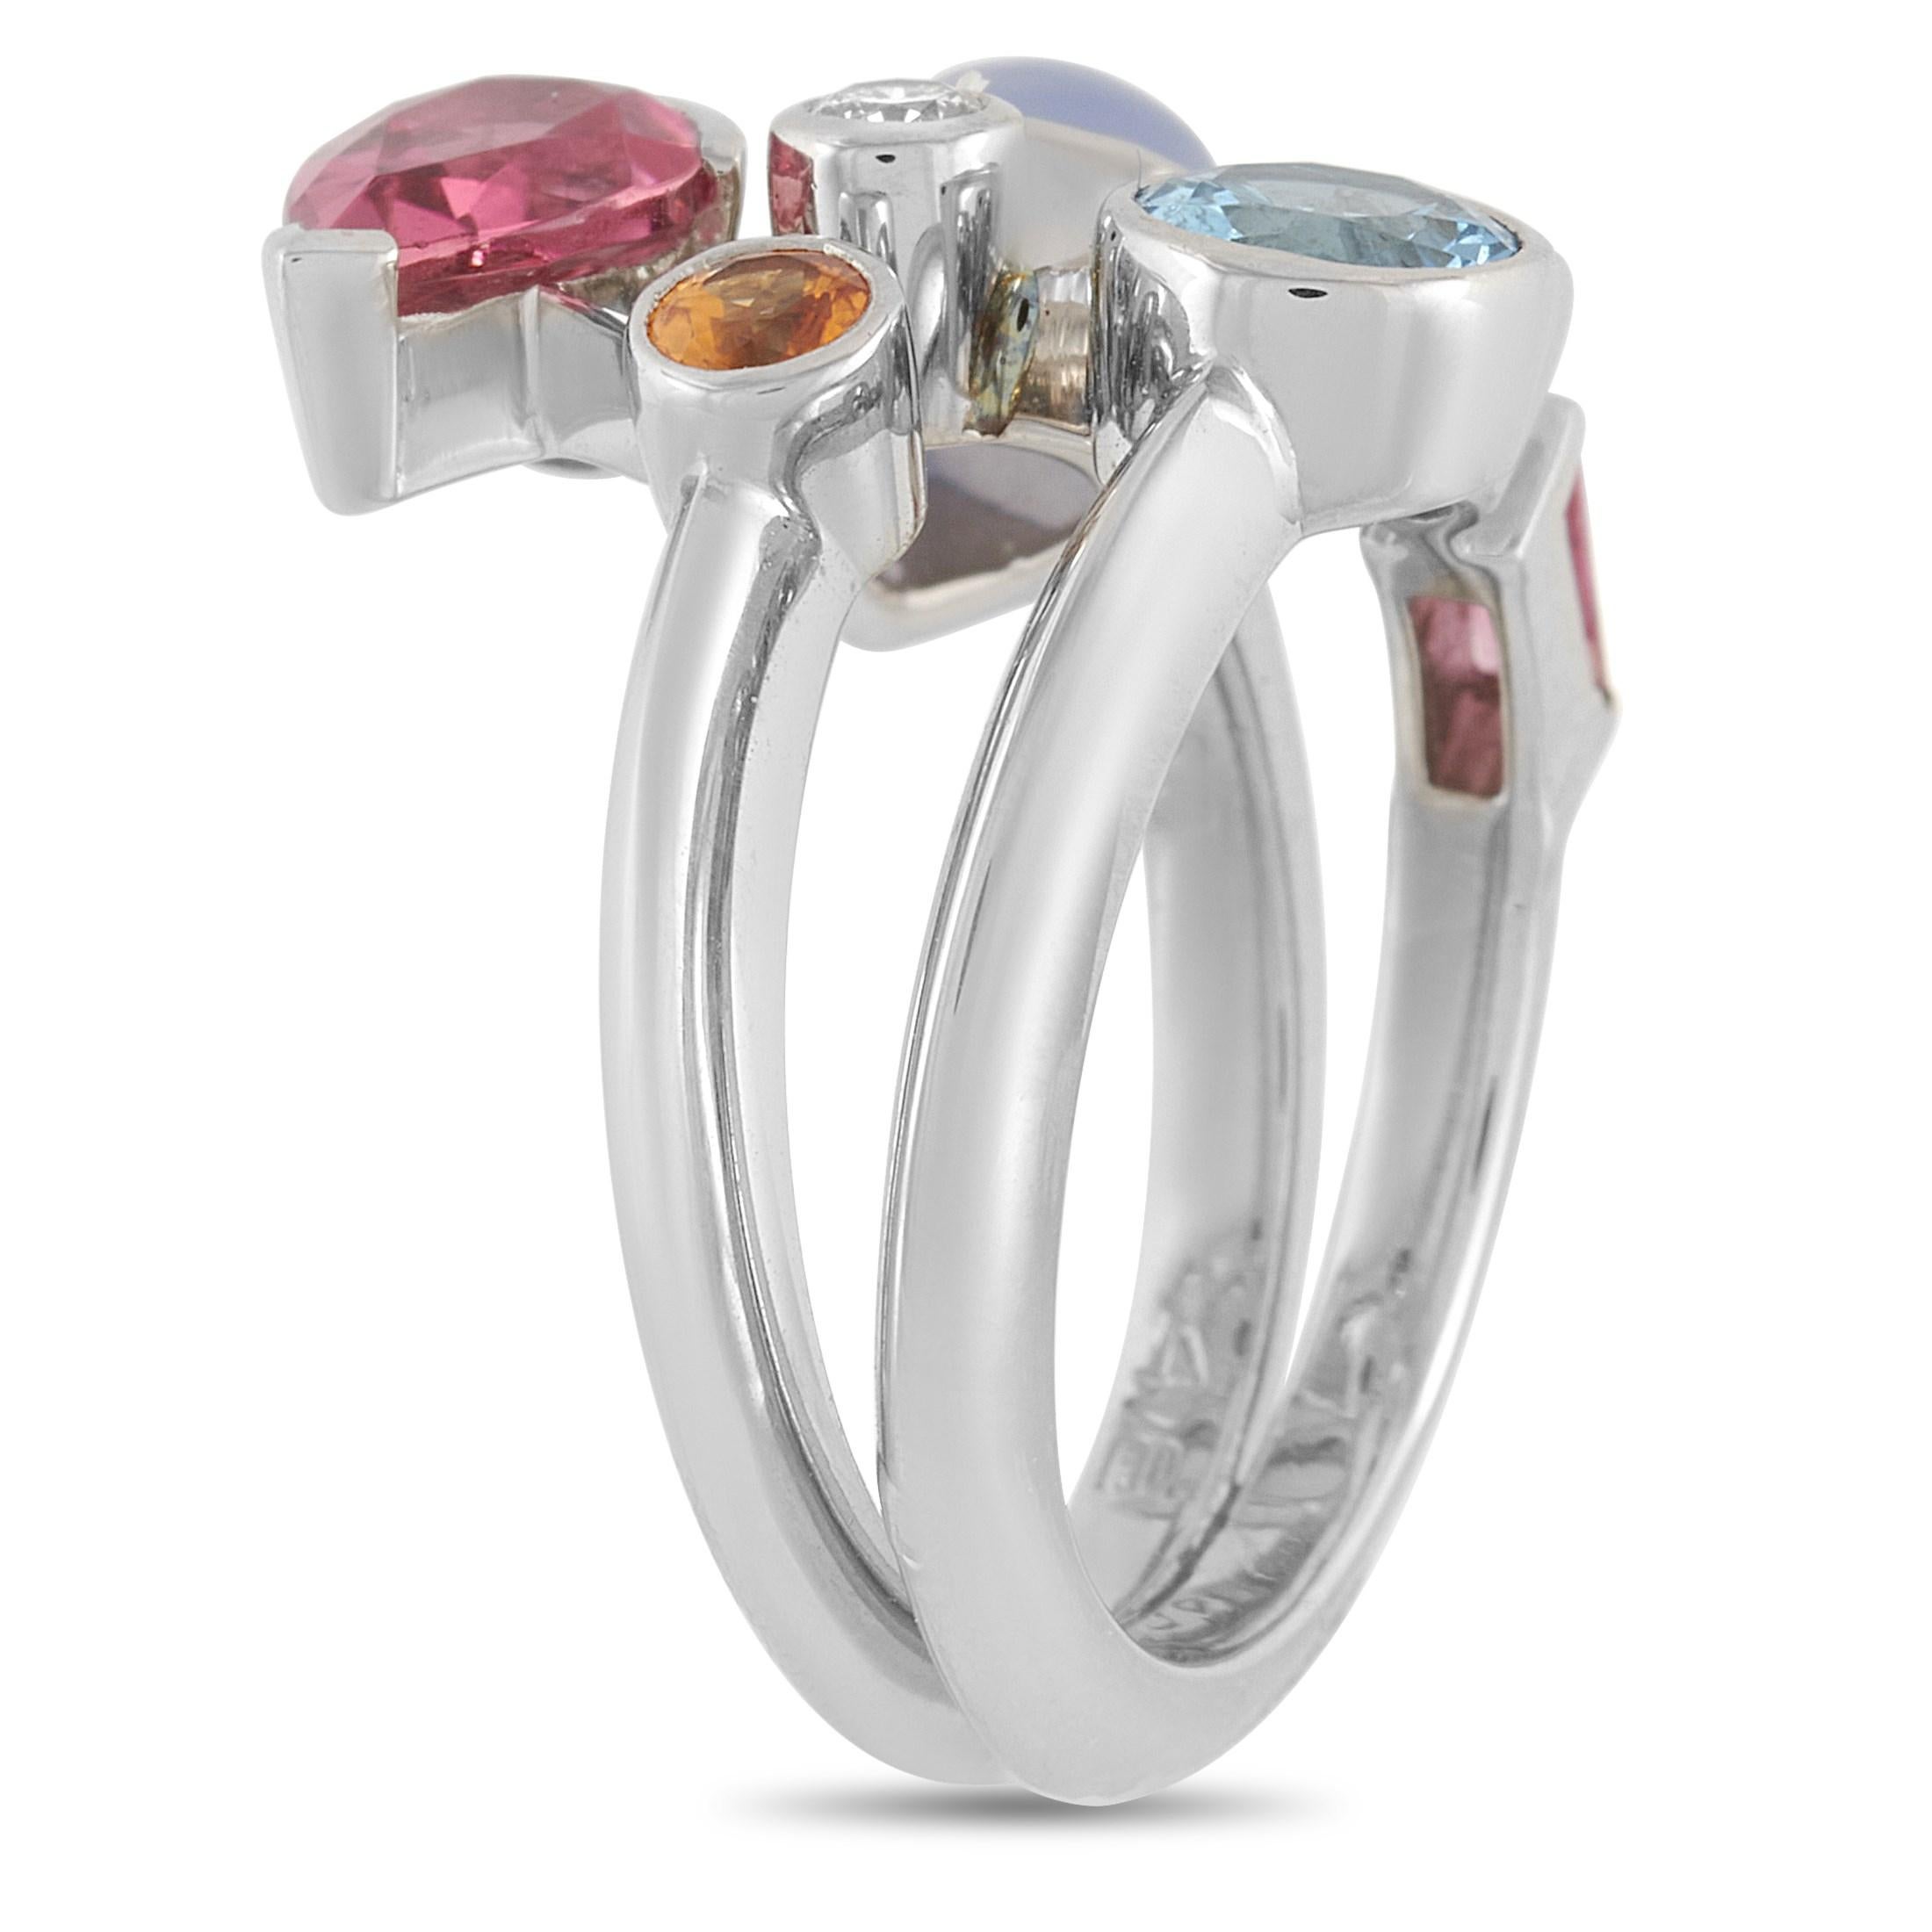 The magnificent Cartier Meli Melo Platinum Multi-Gemstone Ring is a statement piece that will allow your style to shine. Crafted in platinum with a split shank that connects in a multi-gem sculpted vine center, this ring shimmers with graceful